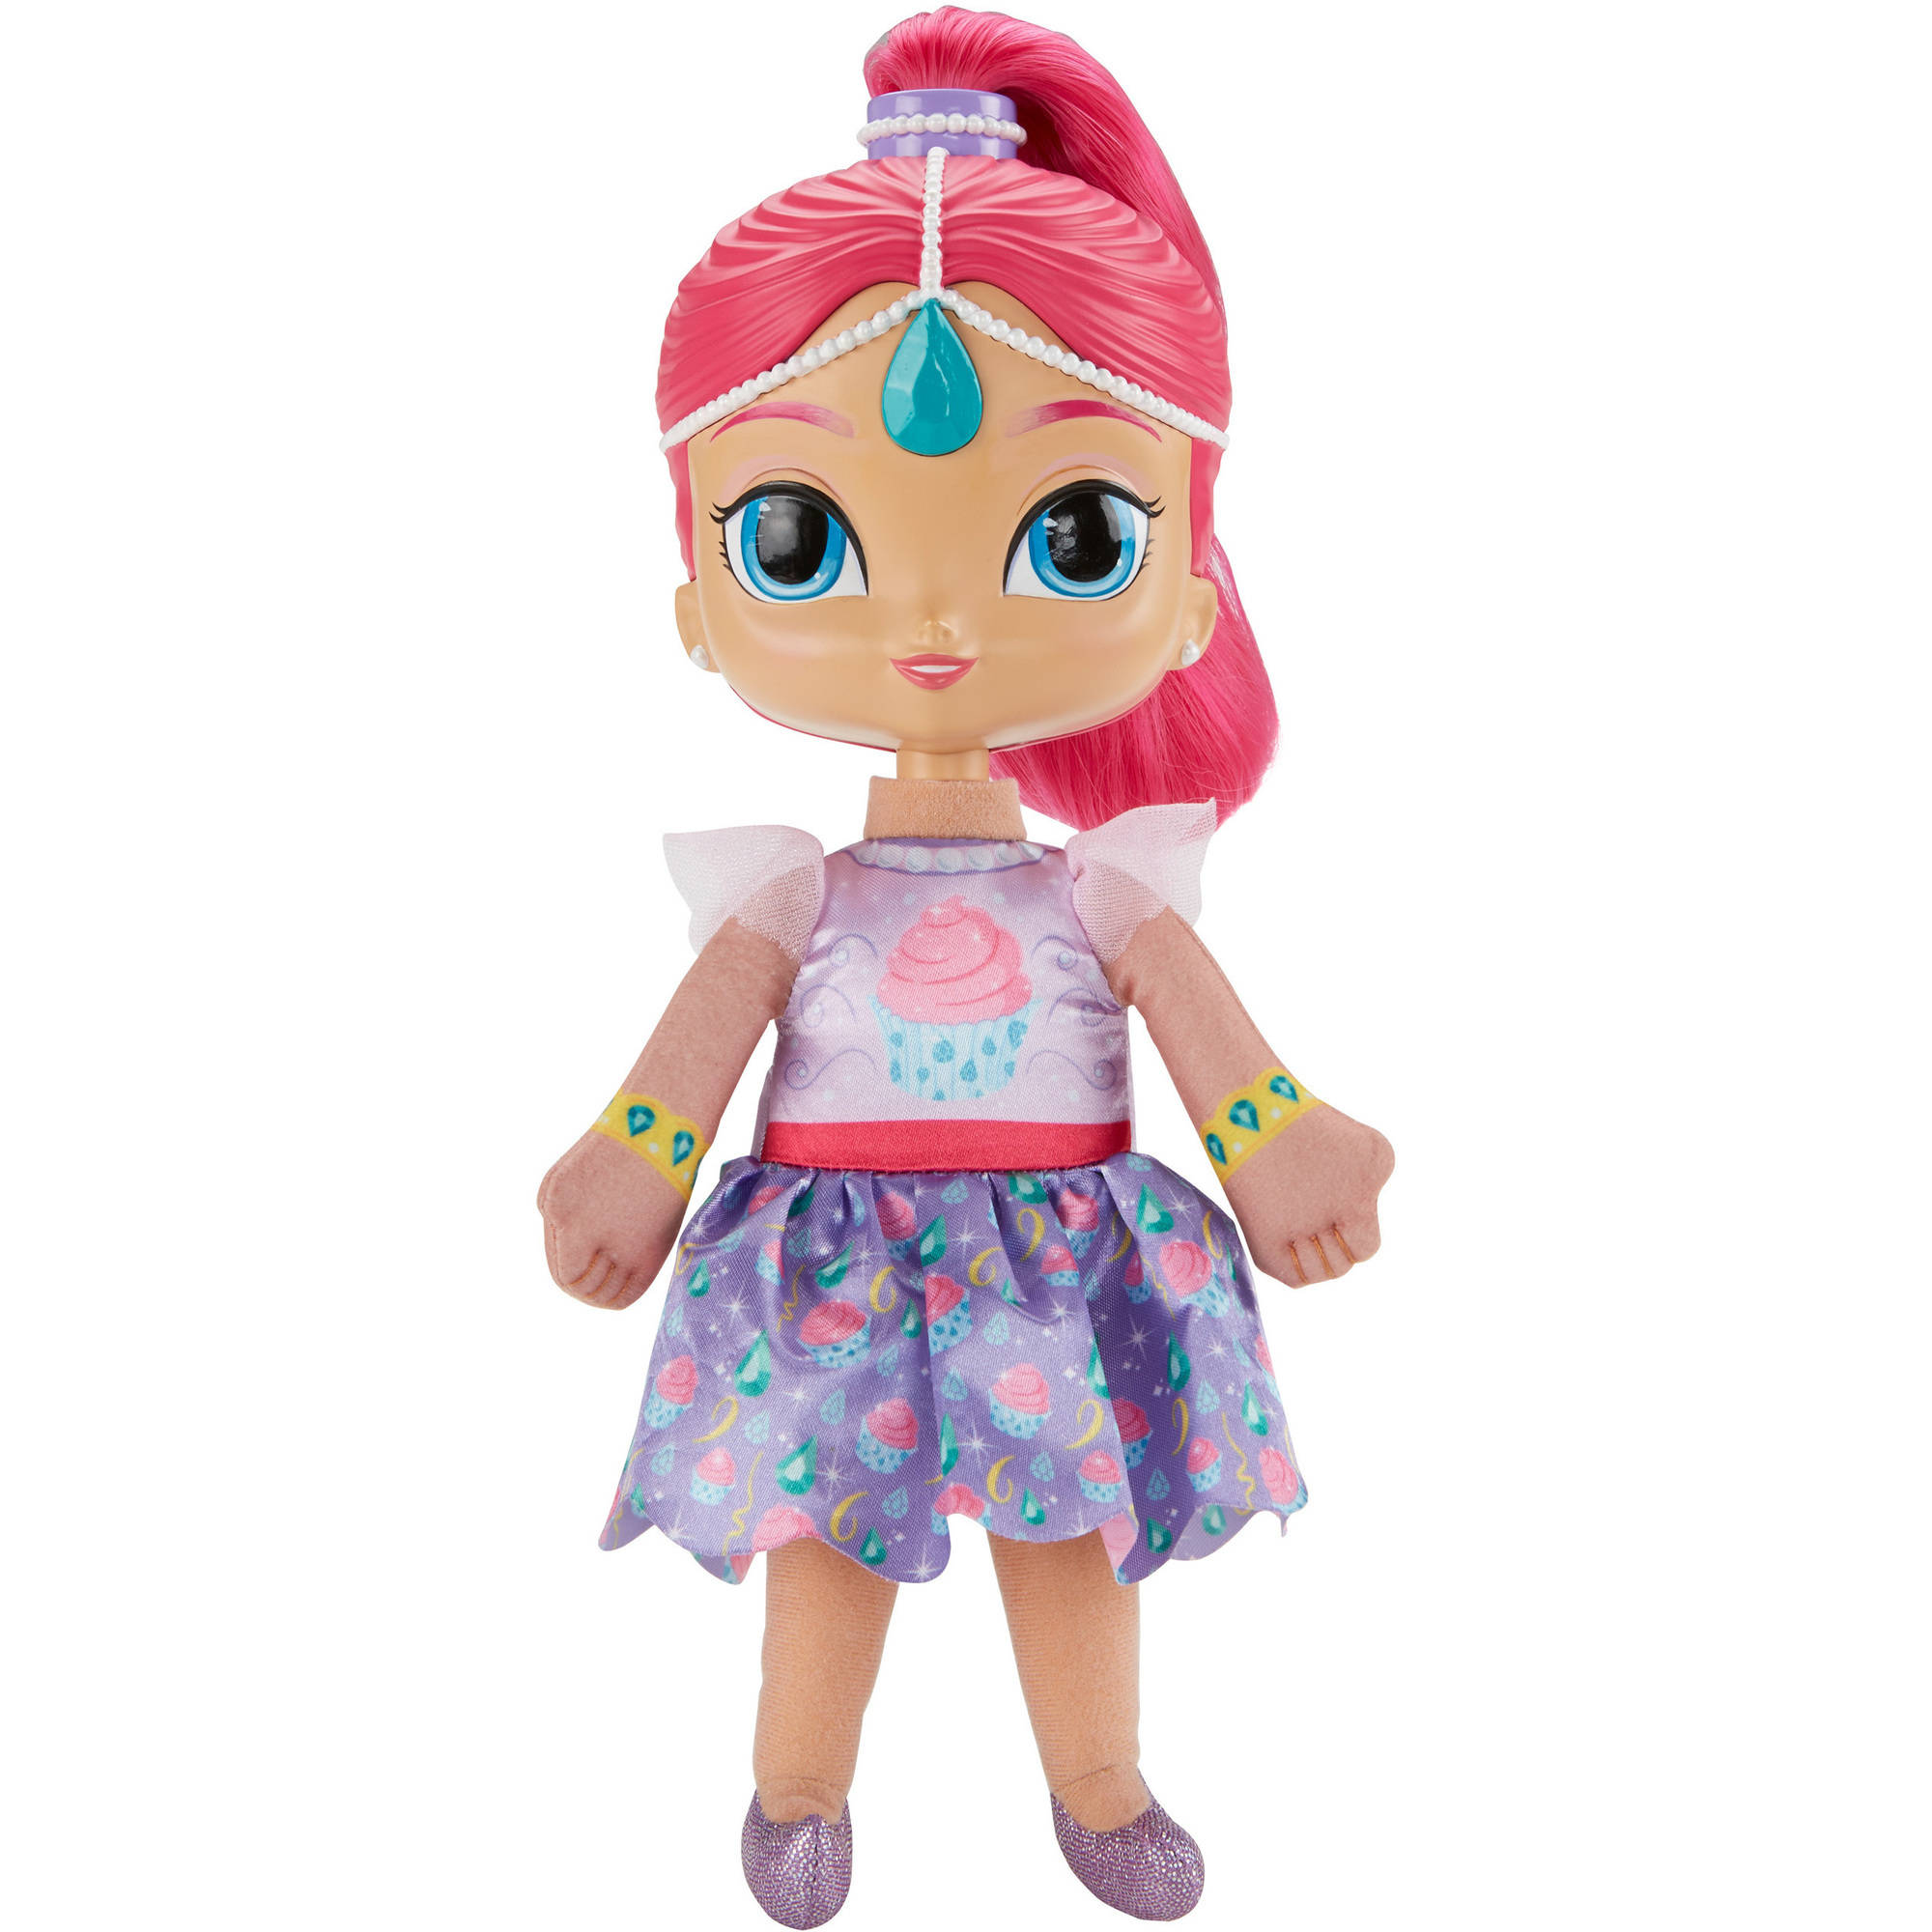 Shimmer and Shine Singing Birthday Wishes Shimmer - image 1 of 4